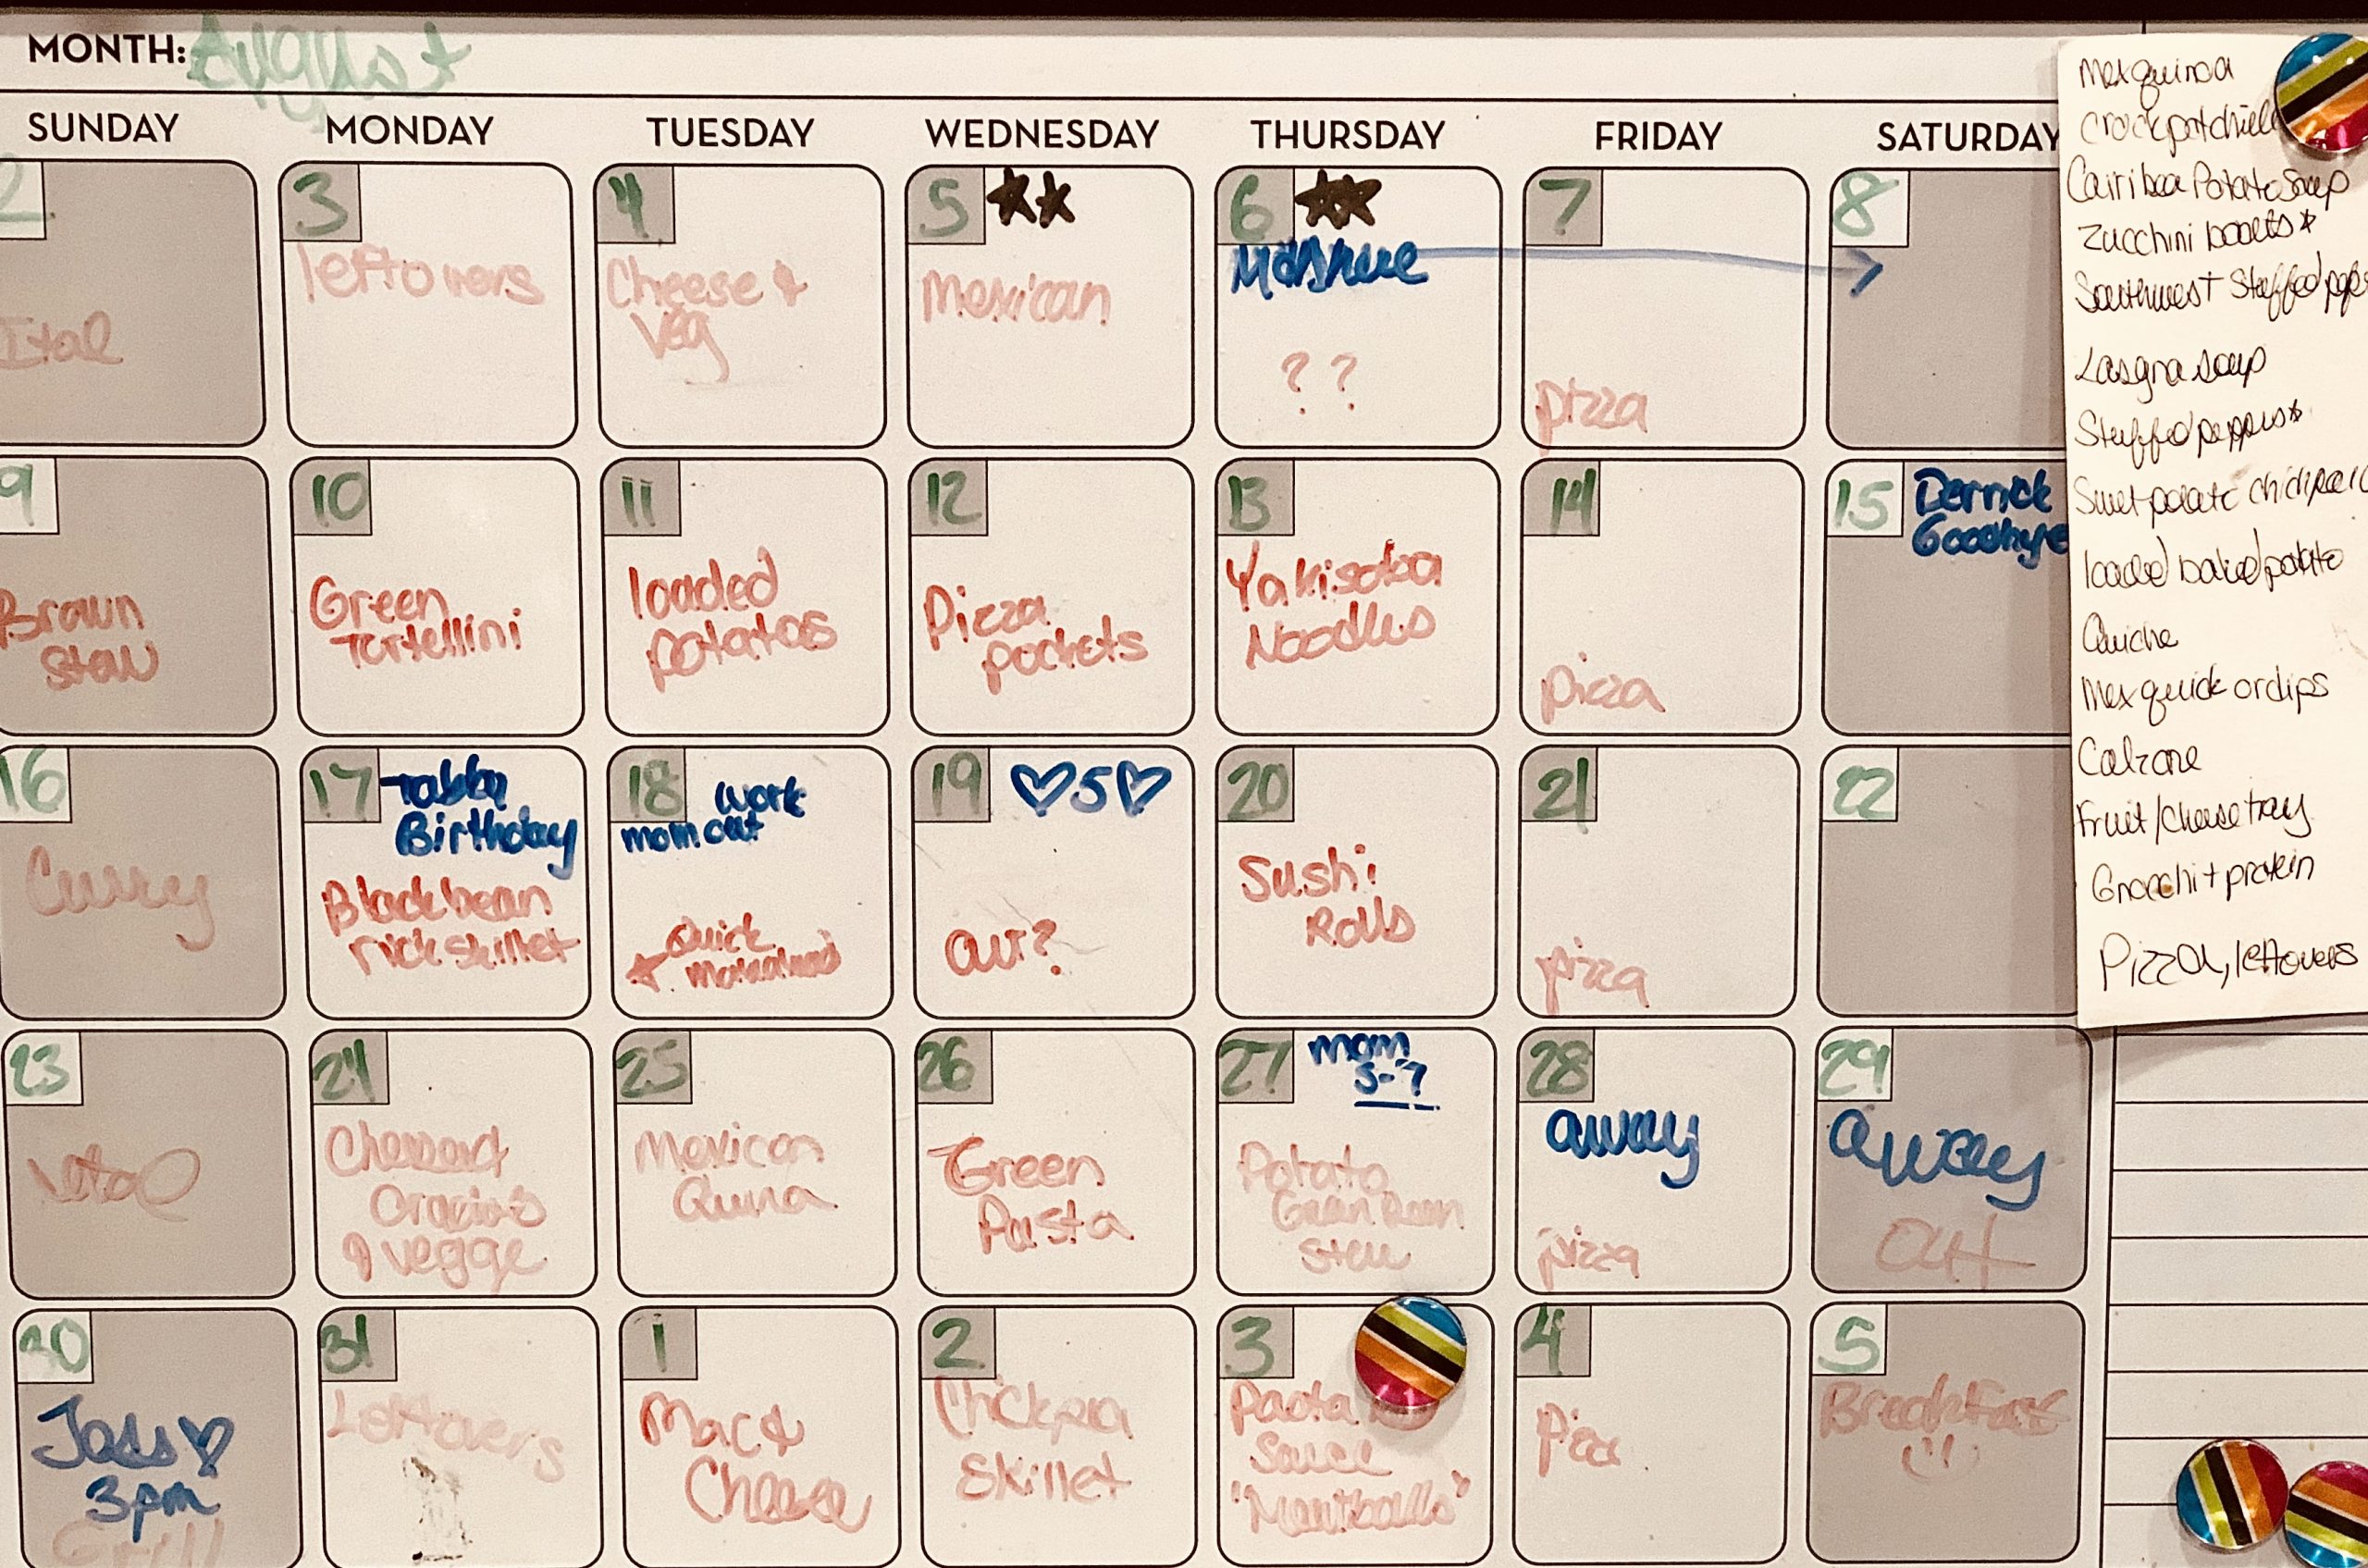 monthly meal plan schedule